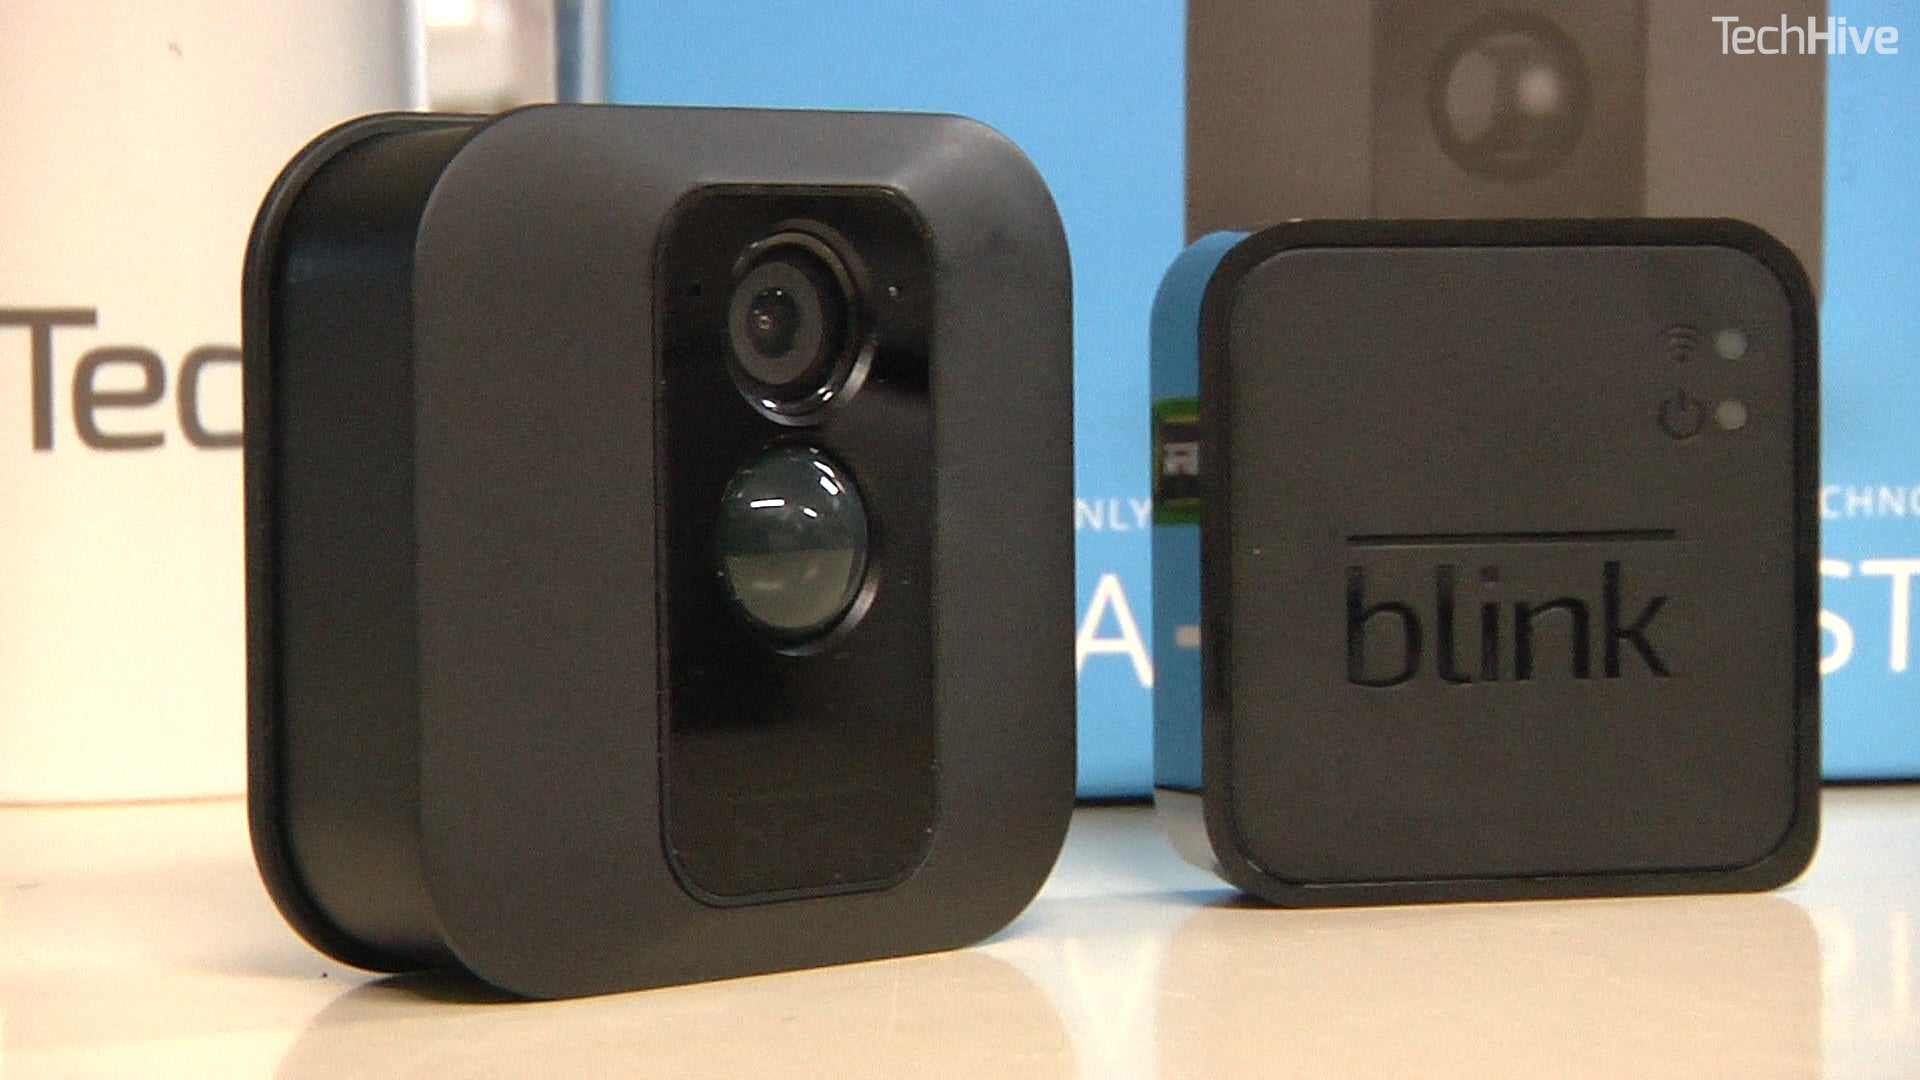 Blink XT Home Security Camera review | IDG.TV1920 x 1080